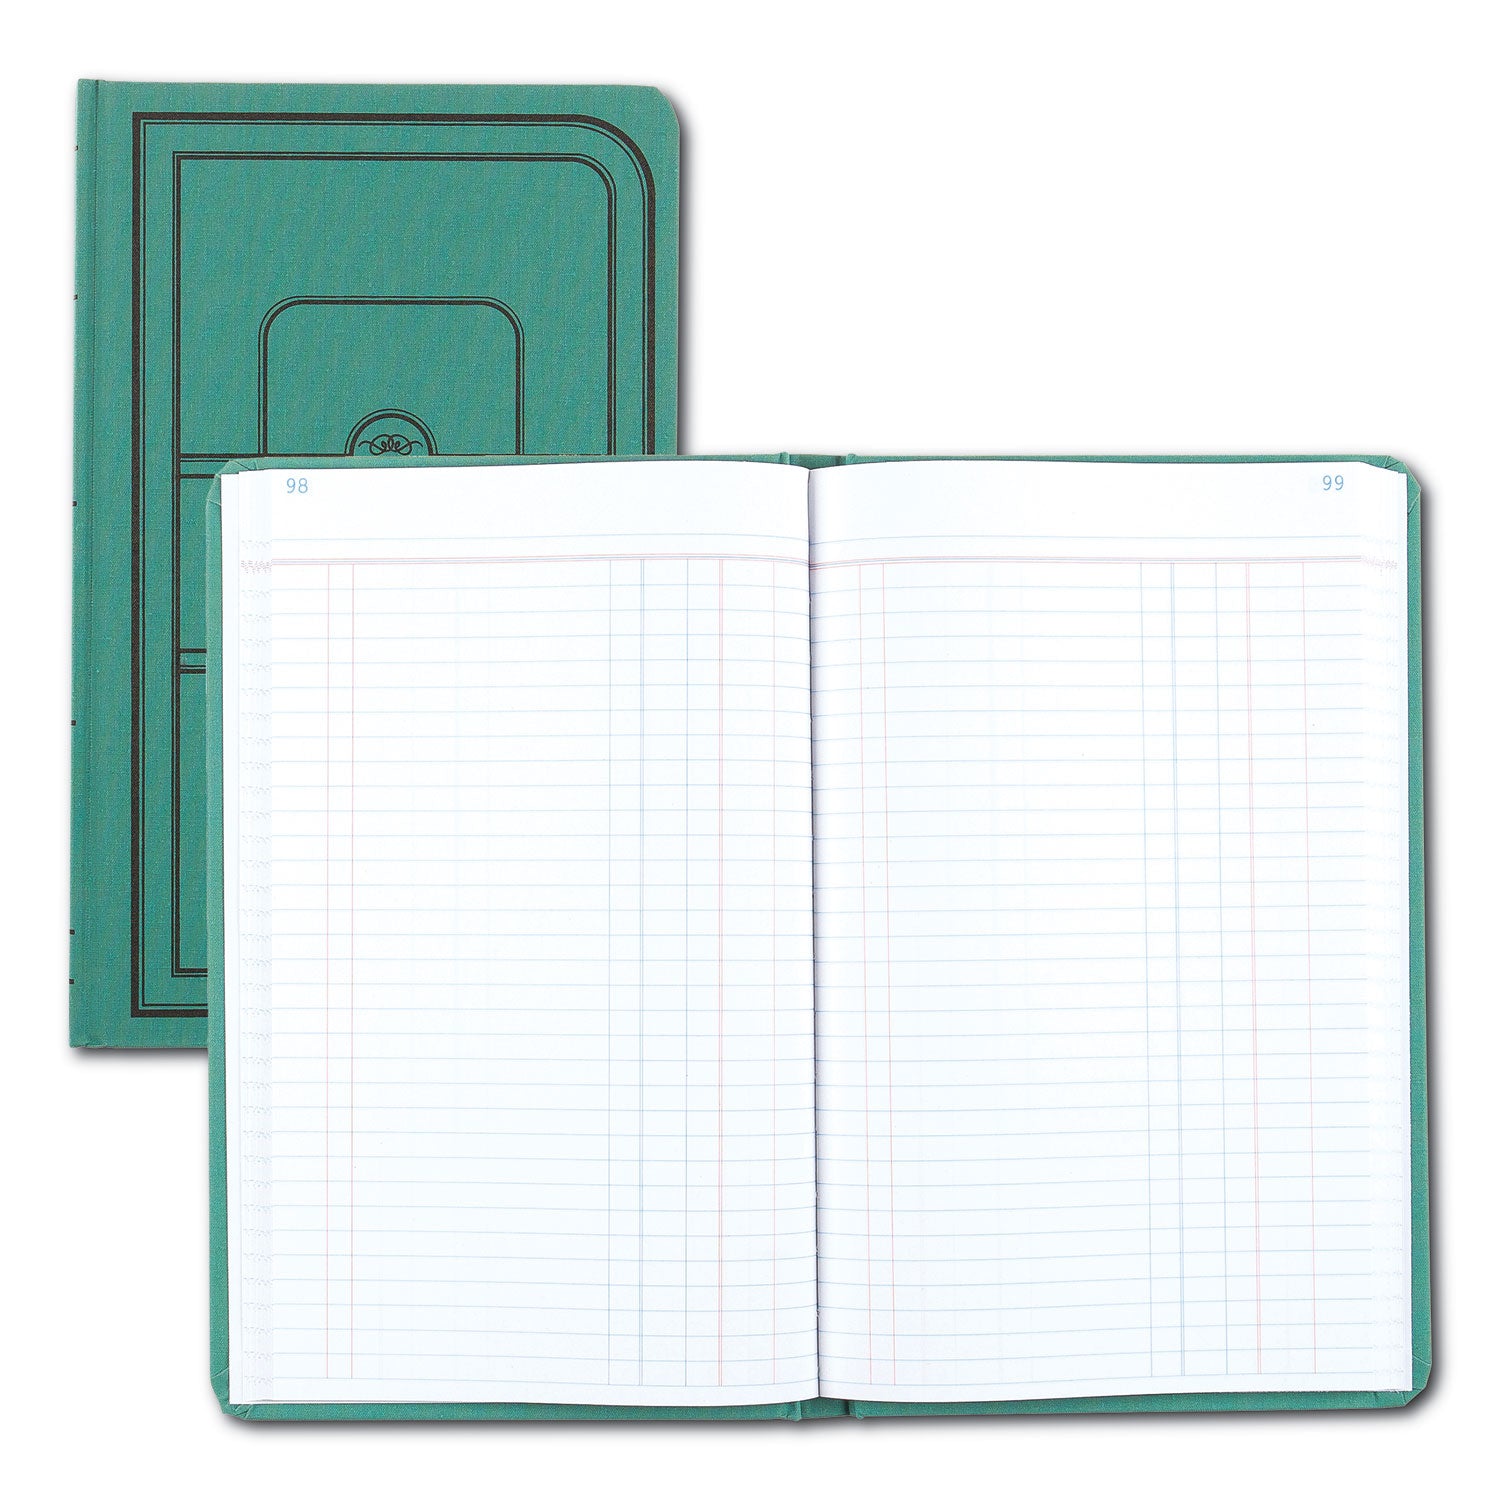 tuff-series-accounting-journal-single-page-8-column-accounting-format-green-cover-12-x-75-sheets-500-sheets-book_reda66500j - 1